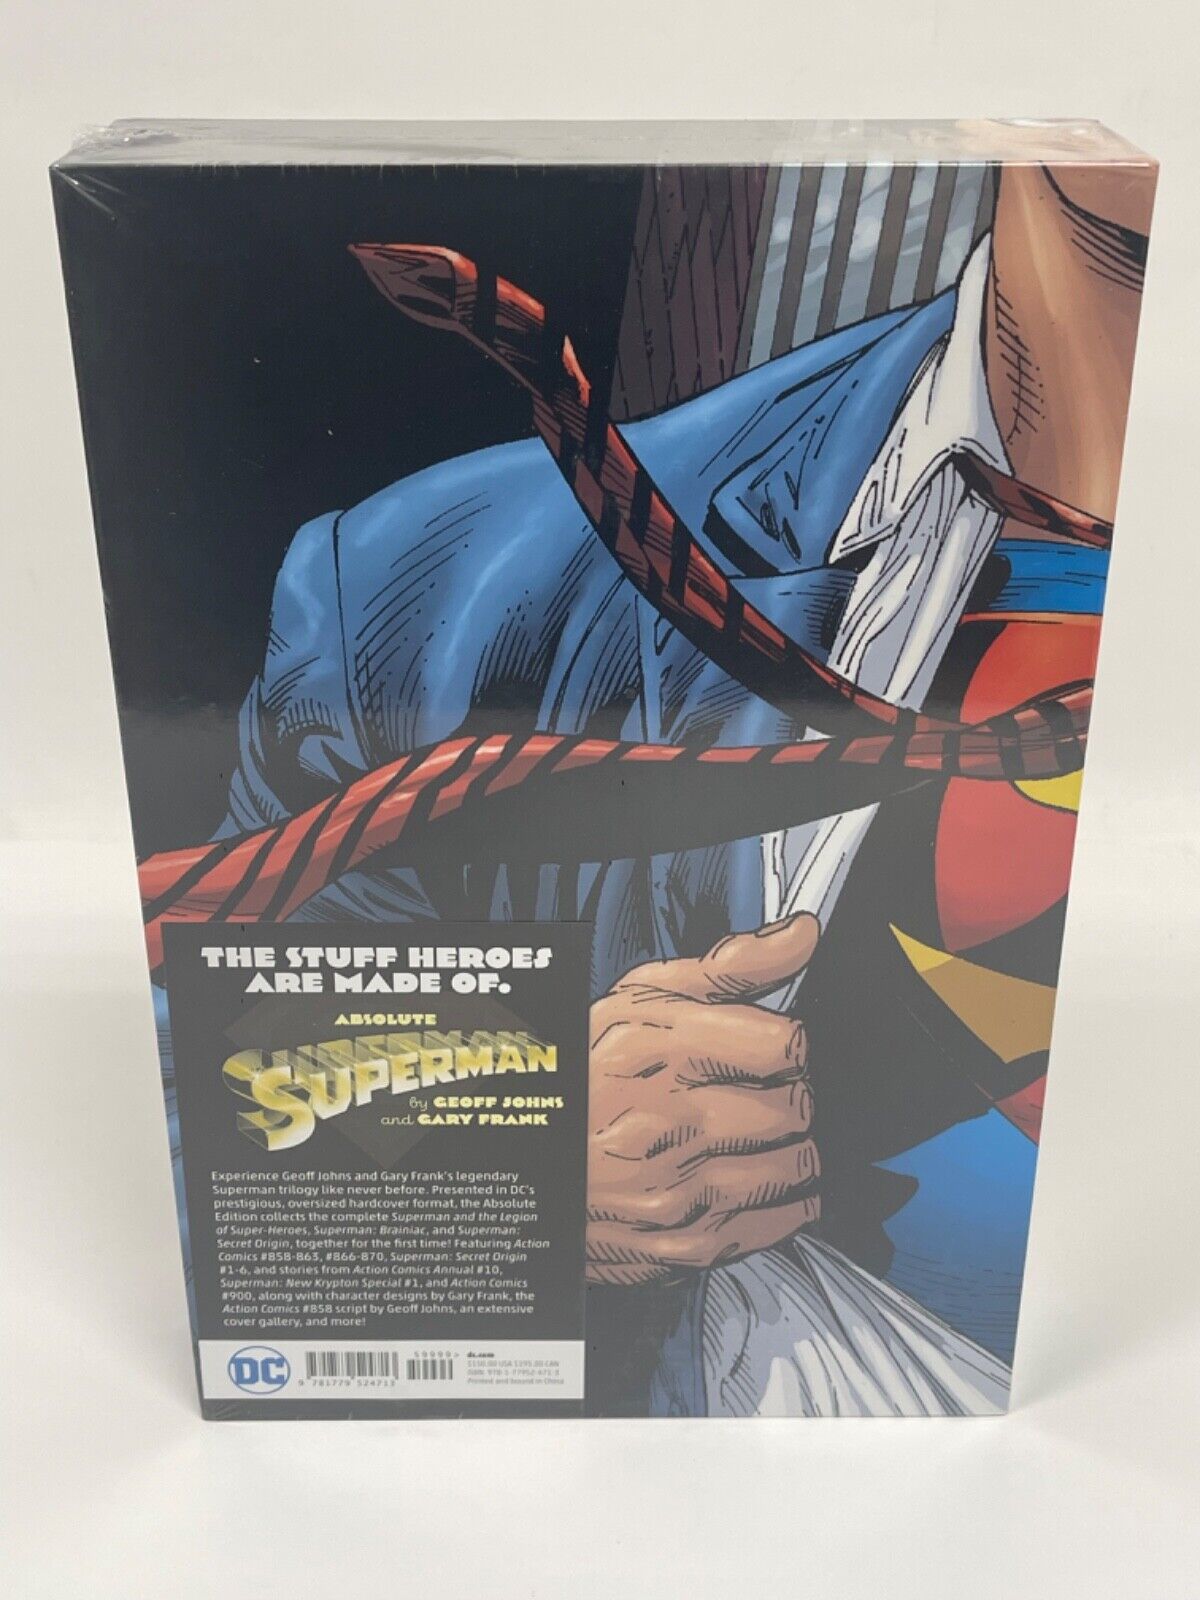 Absolute Superman by Geoff Johns & Gary Frank New DC Comics HC Hardcover Sealed